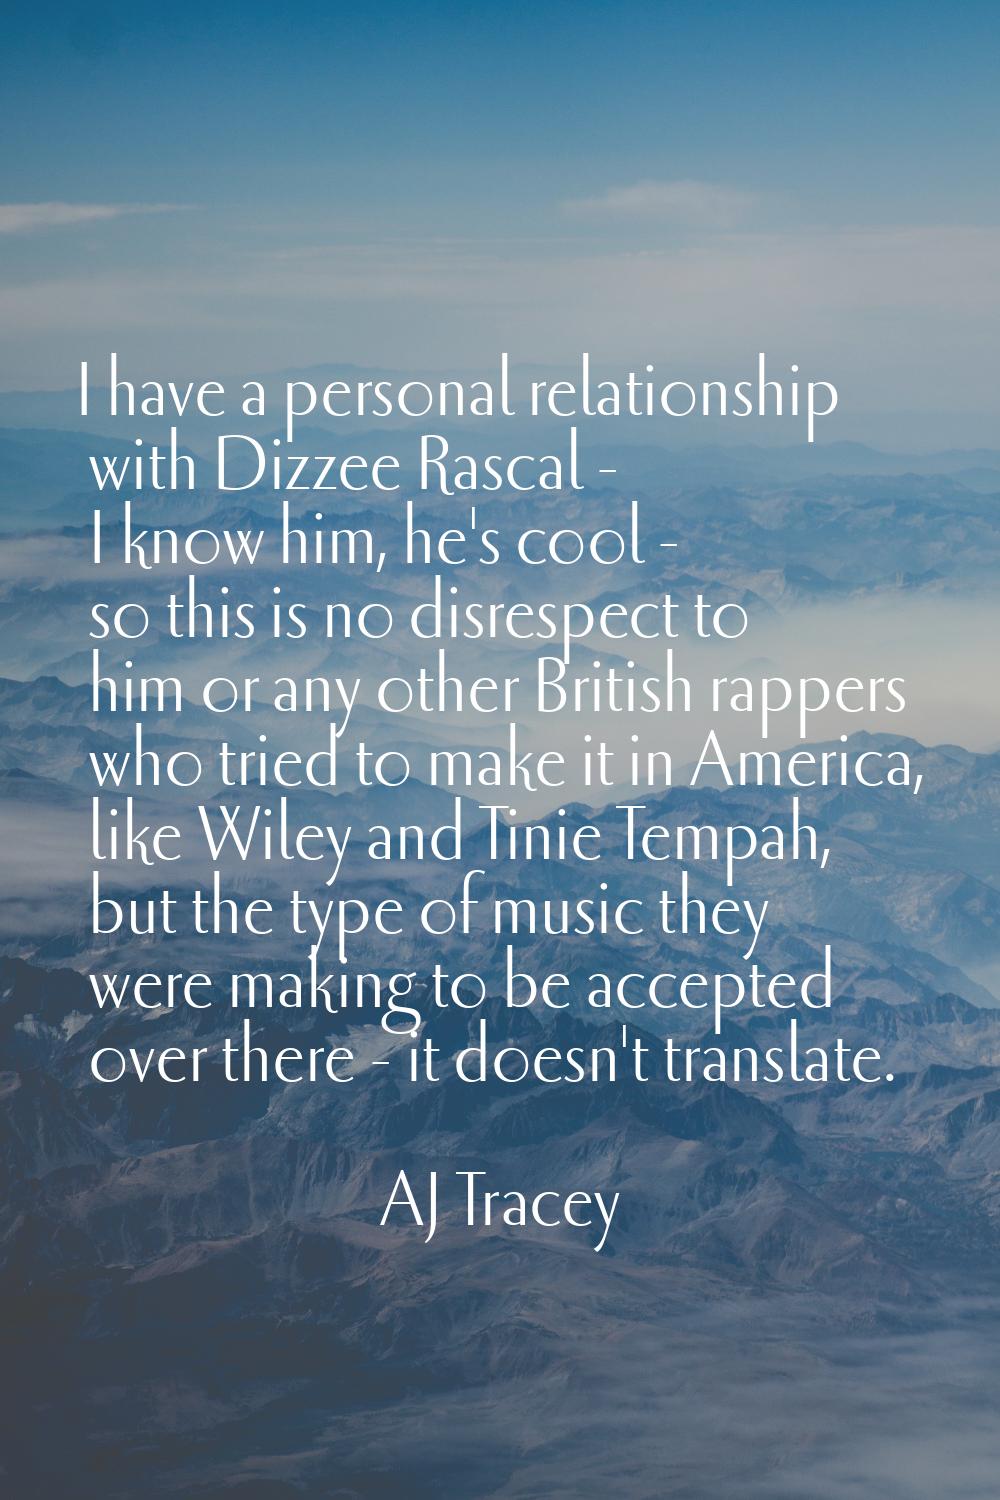 I have a personal relationship with Dizzee Rascal - I know him, he's cool - so this is no disrespec